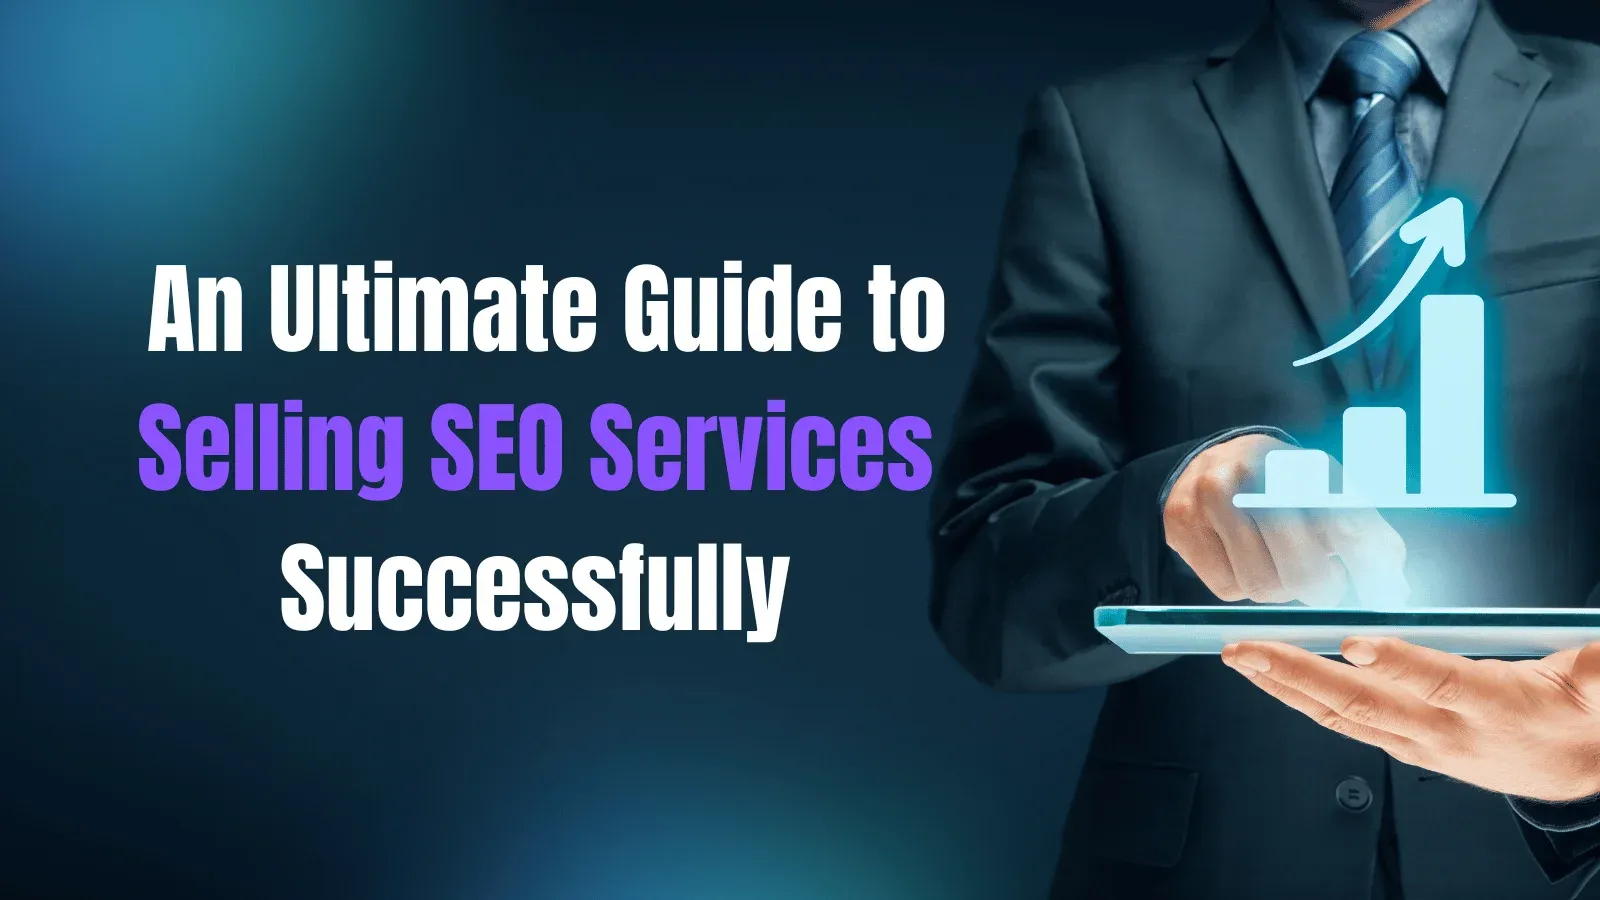 Businessman with glowing graph projection from tablet: "Ultimate Guide to Selling SEO Services."